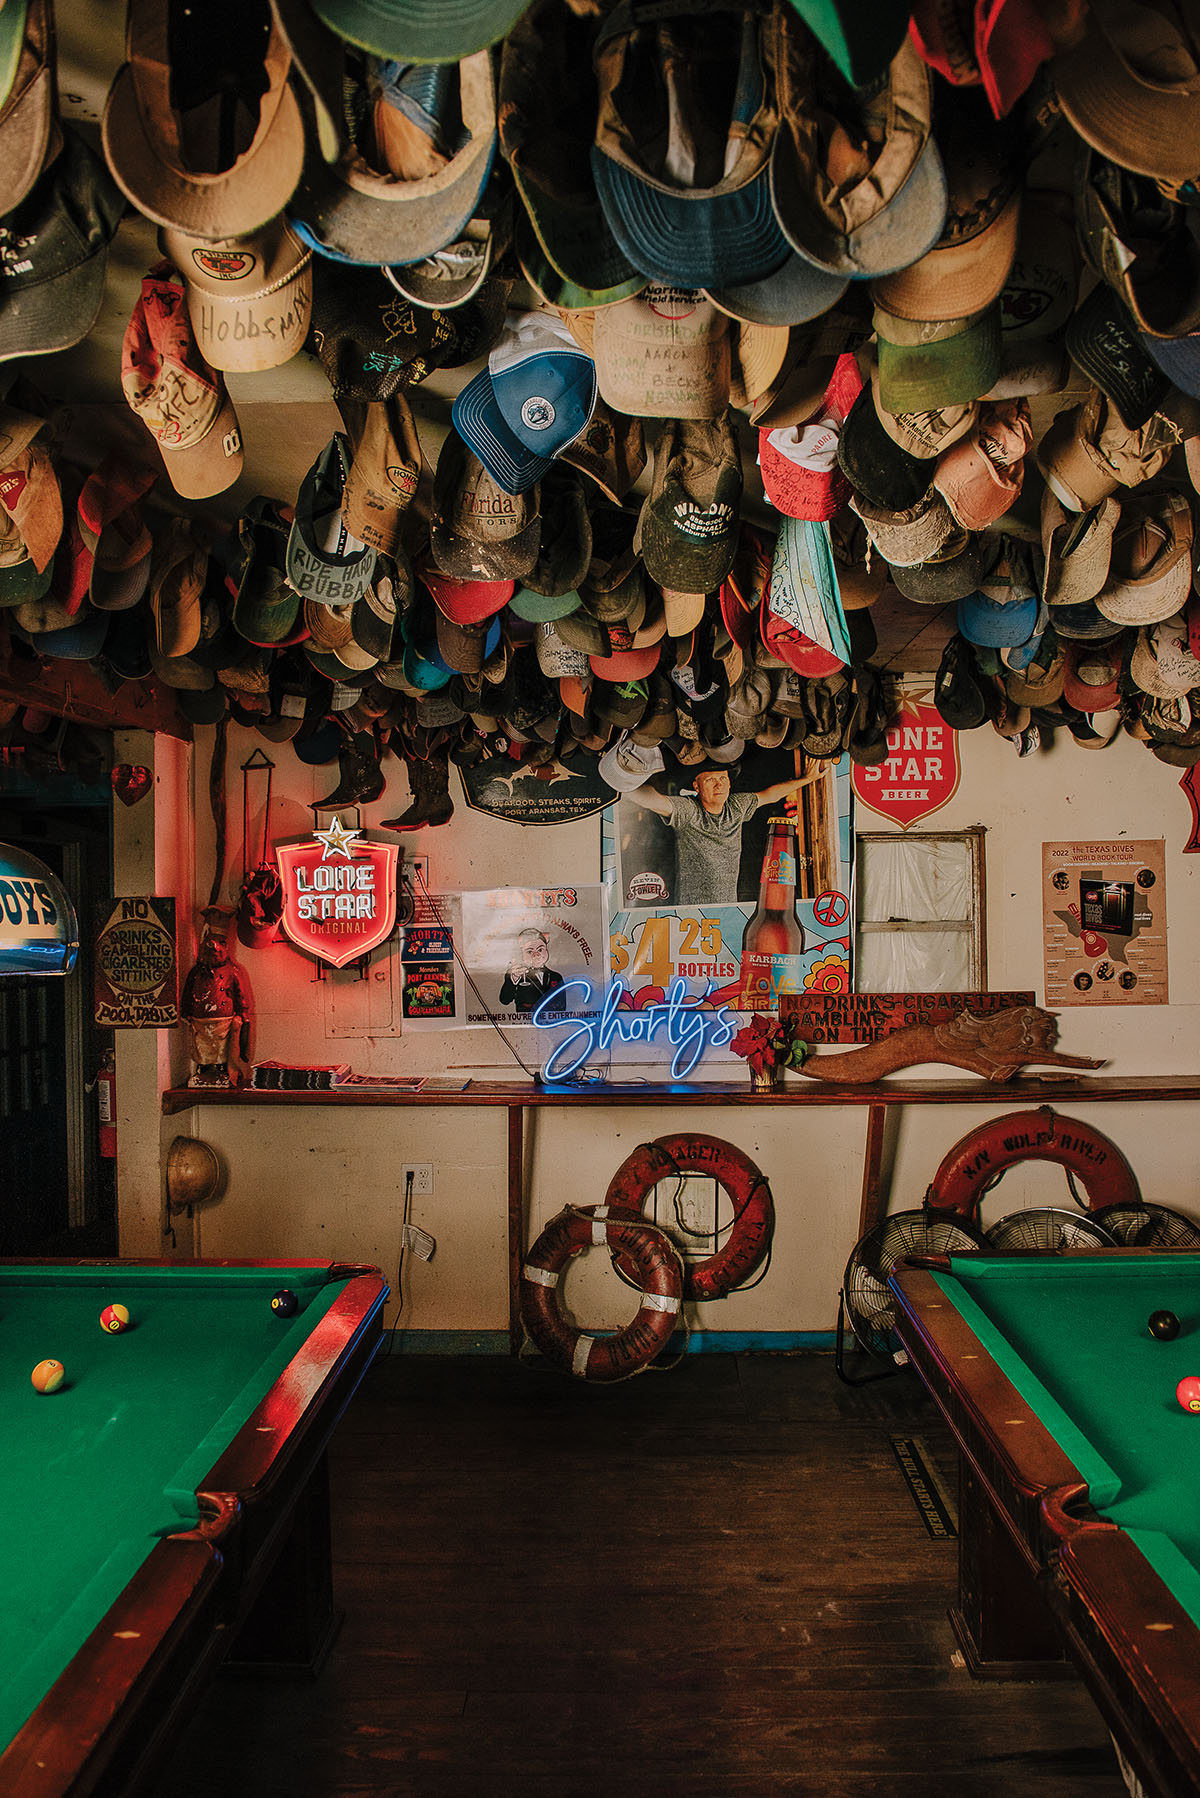 A large collection of hats pack the ceiling of a bar above velvet green pool tables